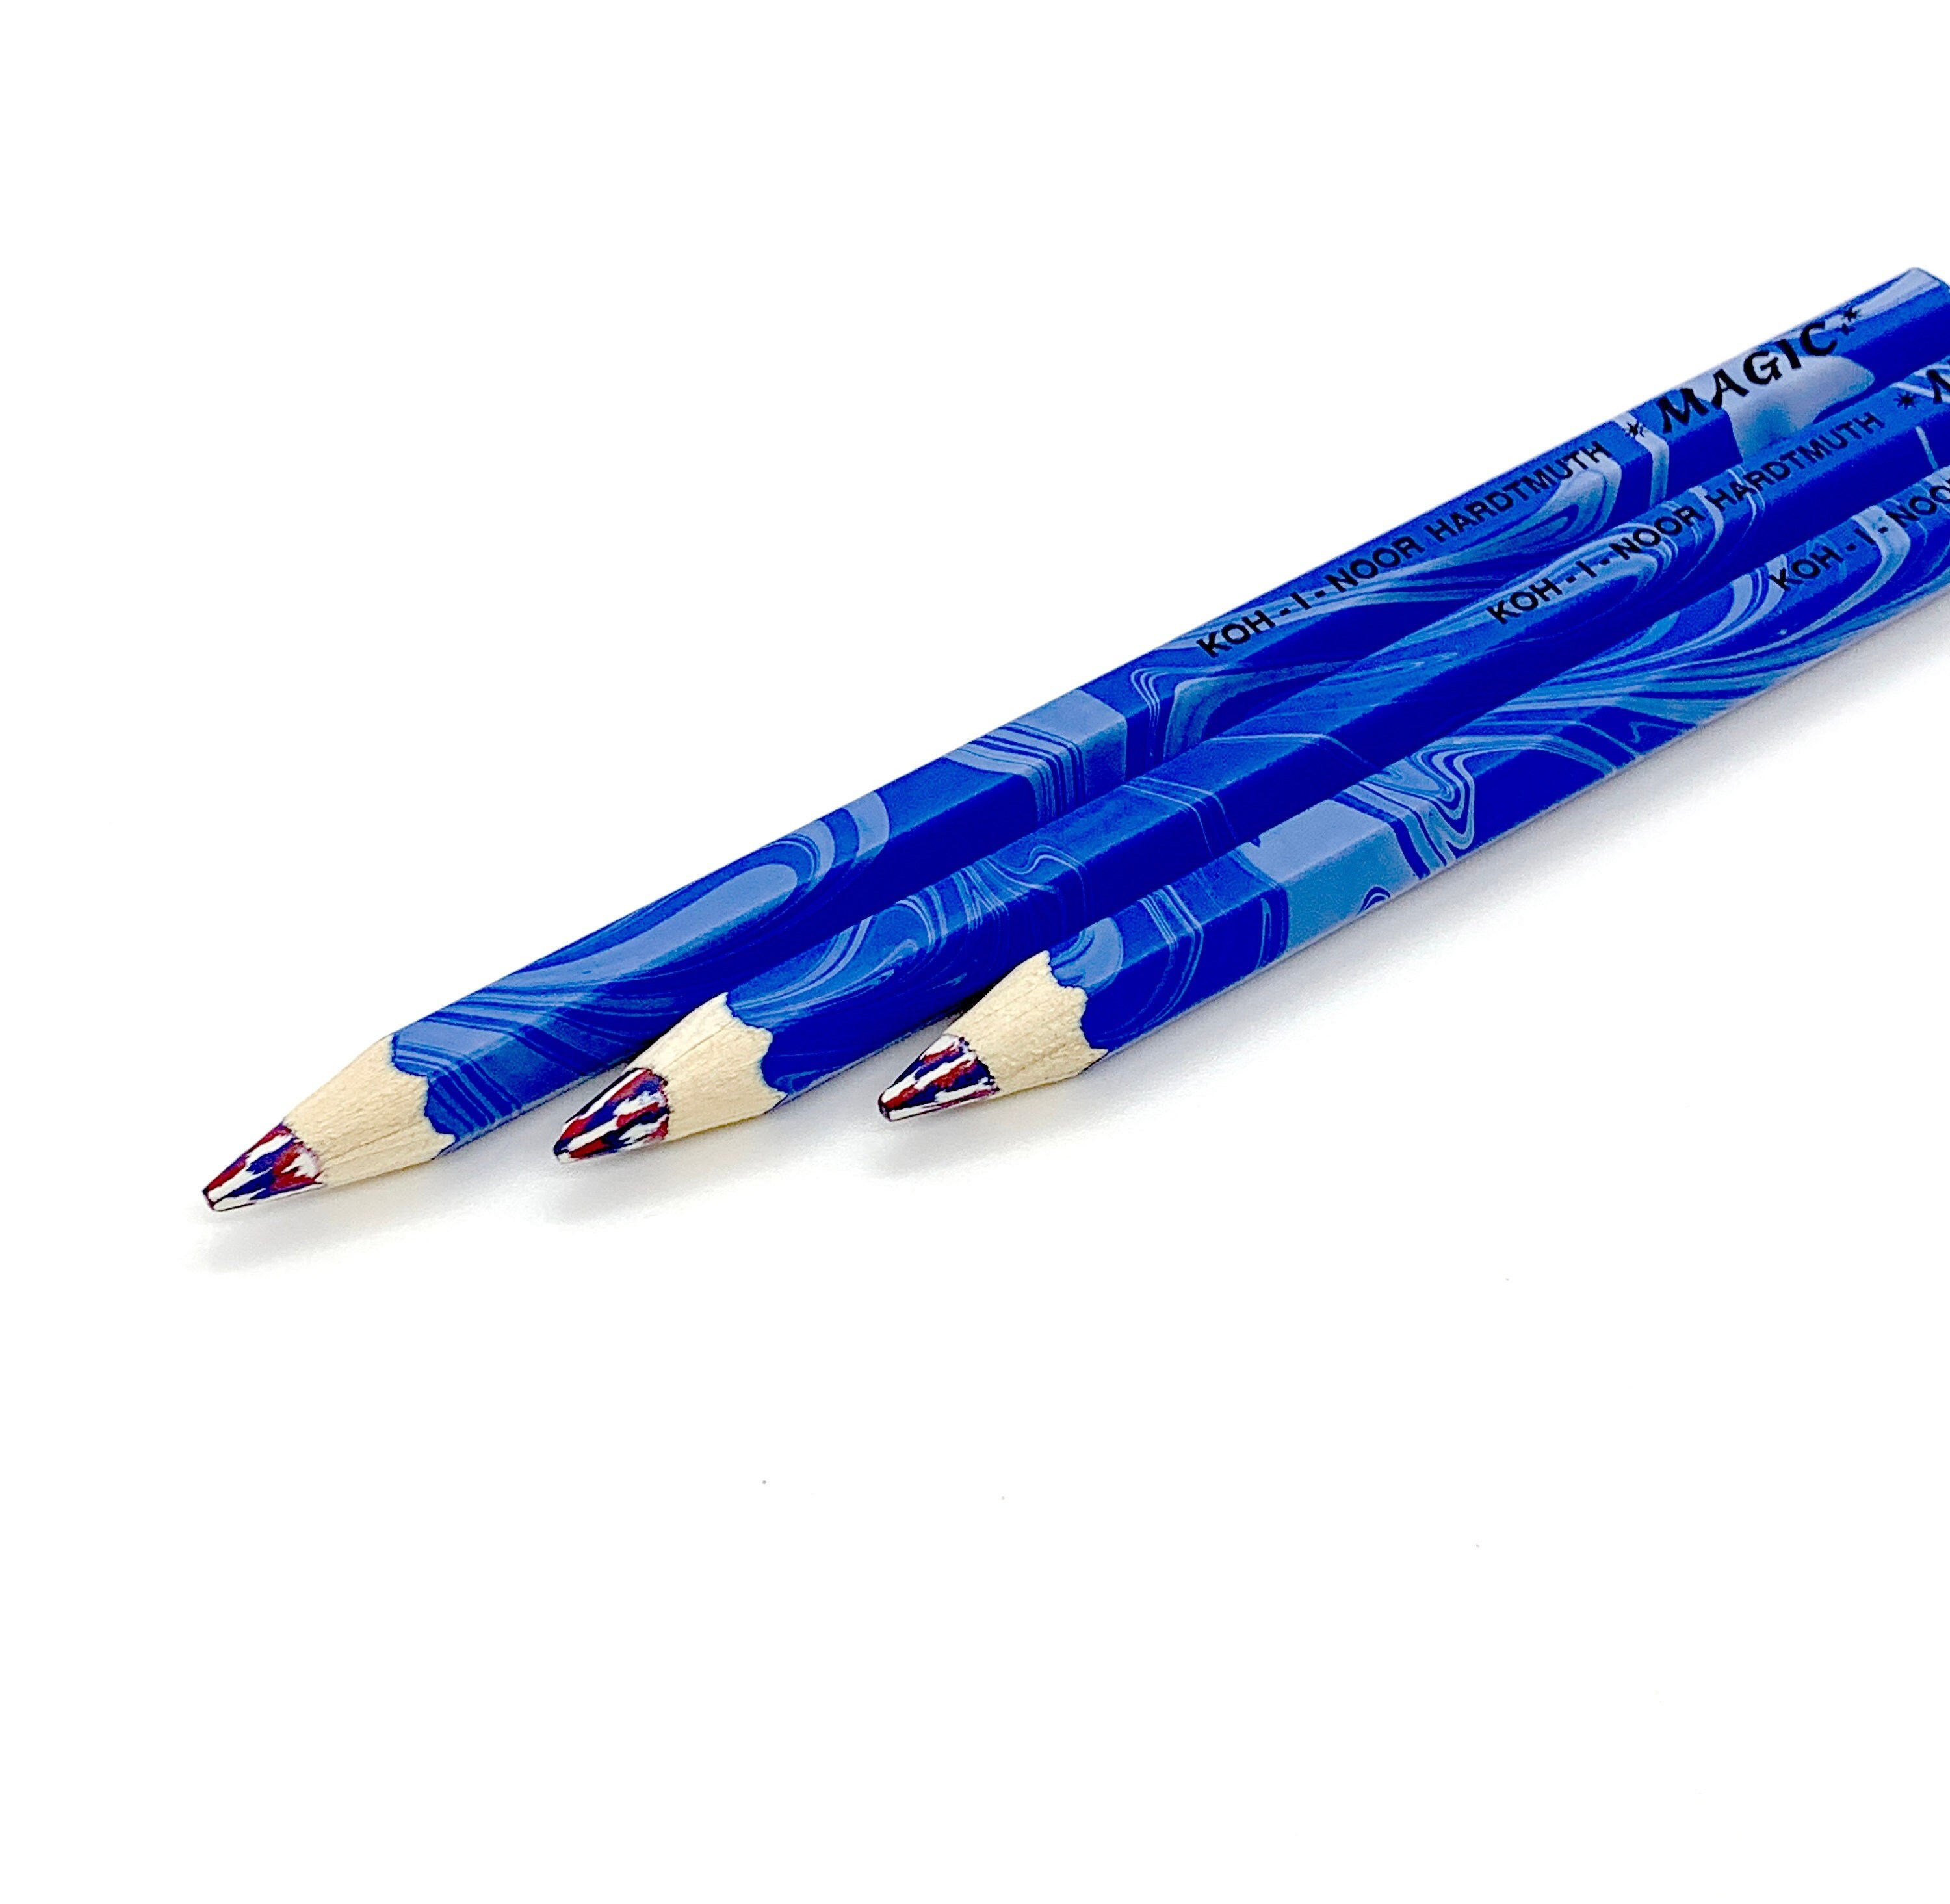 Koh-i-noor, Magic Colour Changing Pens, Crafts, Stationery, Kids